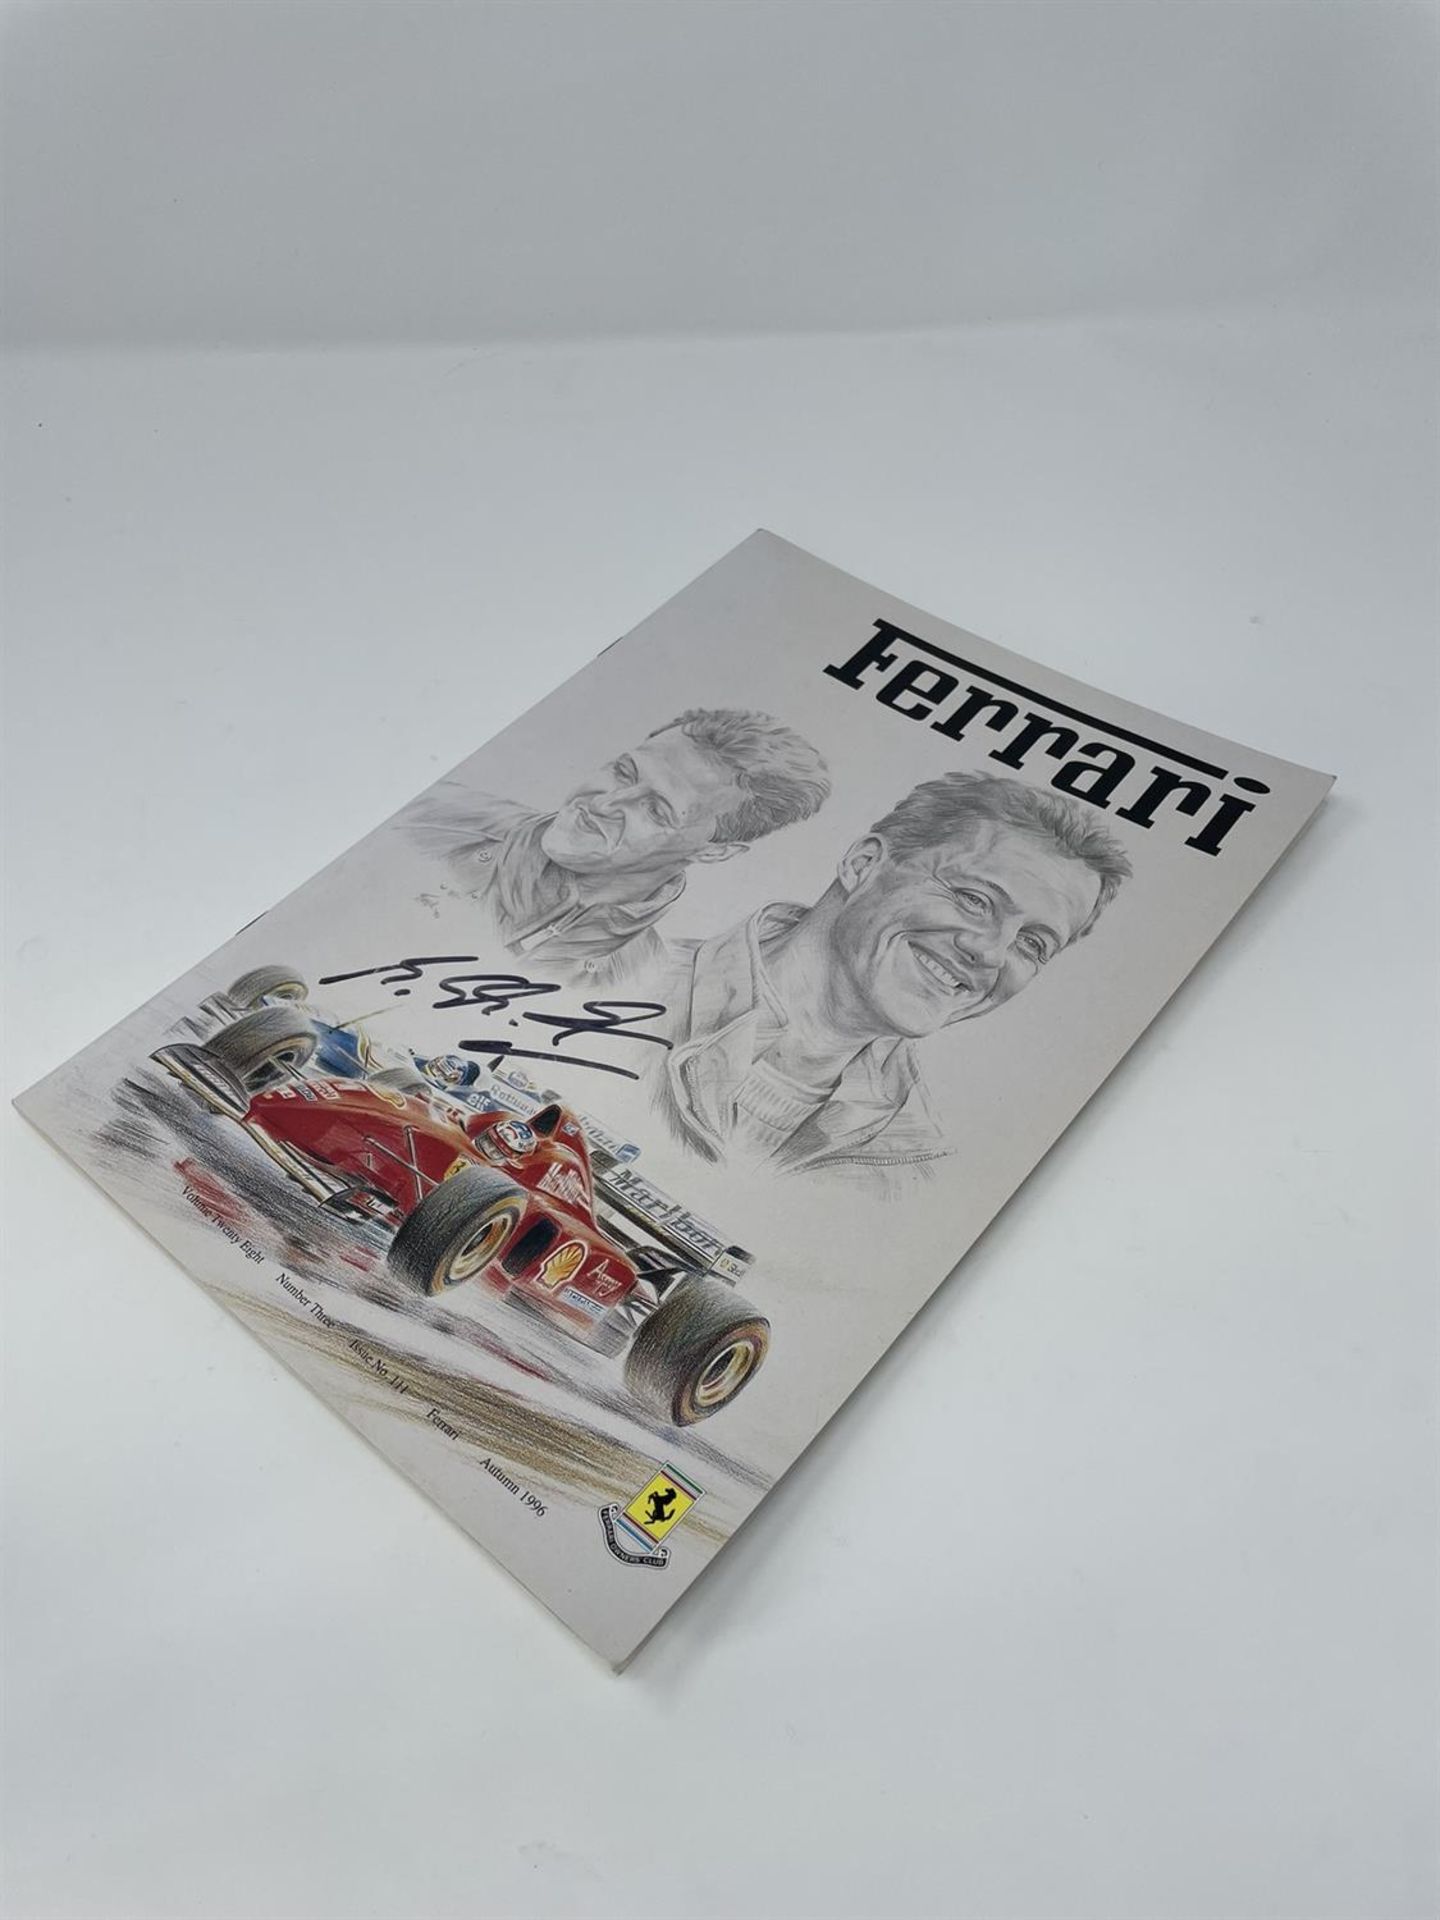 Ferrari Owners Club GB magazine signed by Michael Schumacher - Image 2 of 6